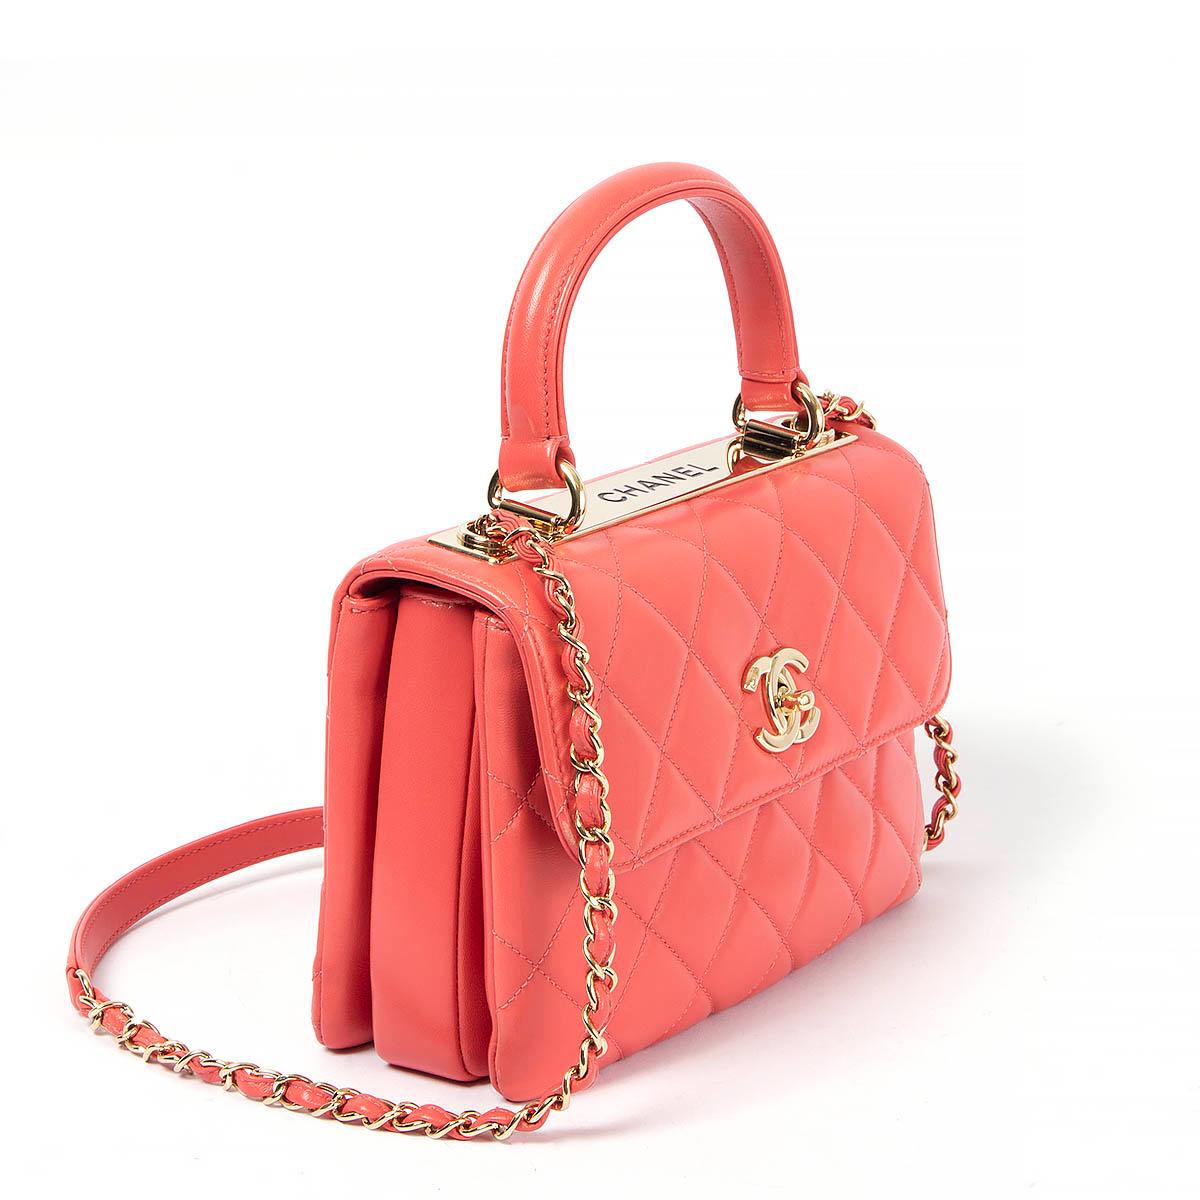 100% authentic Chanel Trendy CC Small Top Handle Bag in coral pink lambskin with gold hardware and metal plate engraved with 